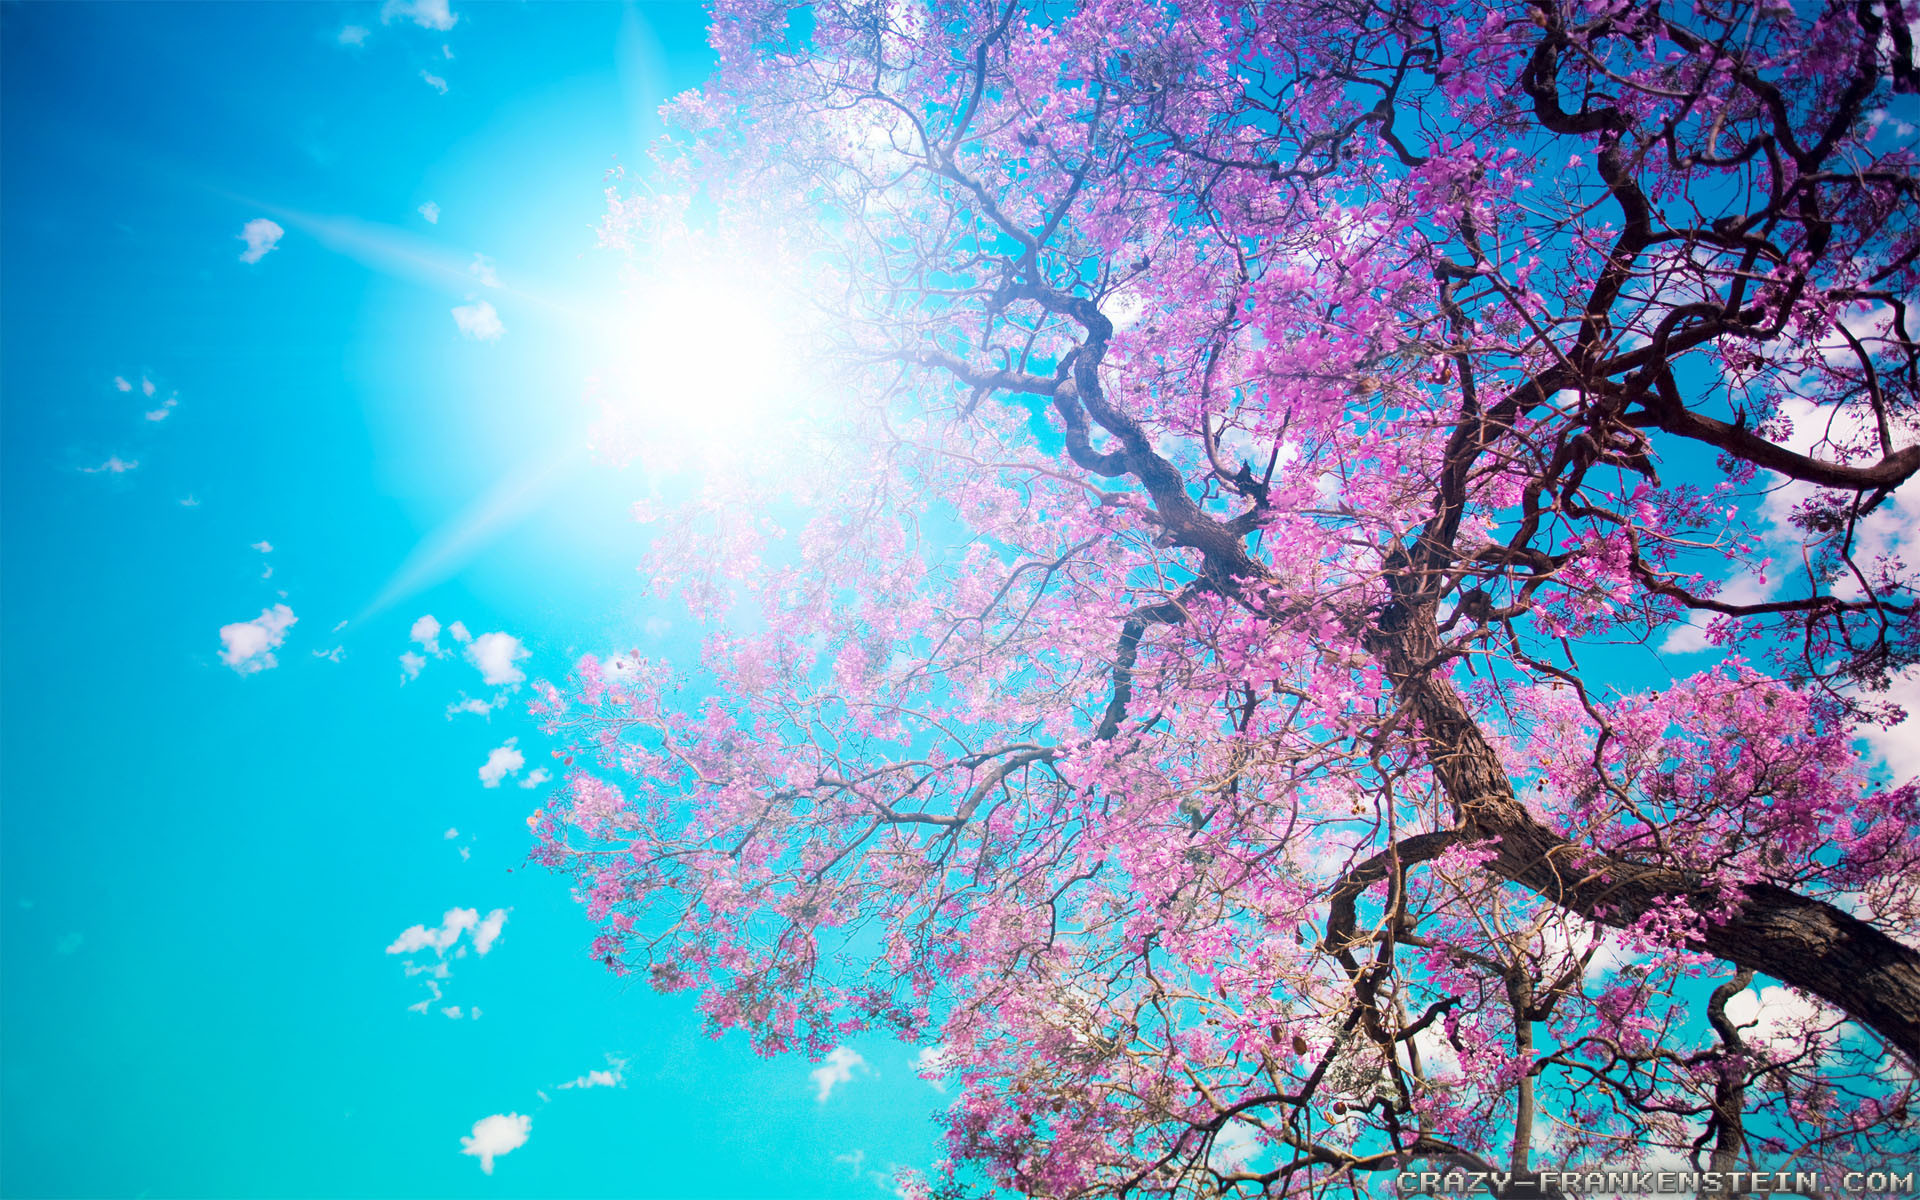 1920x1200  Wallpaper: Beautiful Spring nature wallpapers. Resolution:  1024x768 | 1280x1024 | 1600x1200. Widescreen Res: 1440x900 | 1680x1050 |  